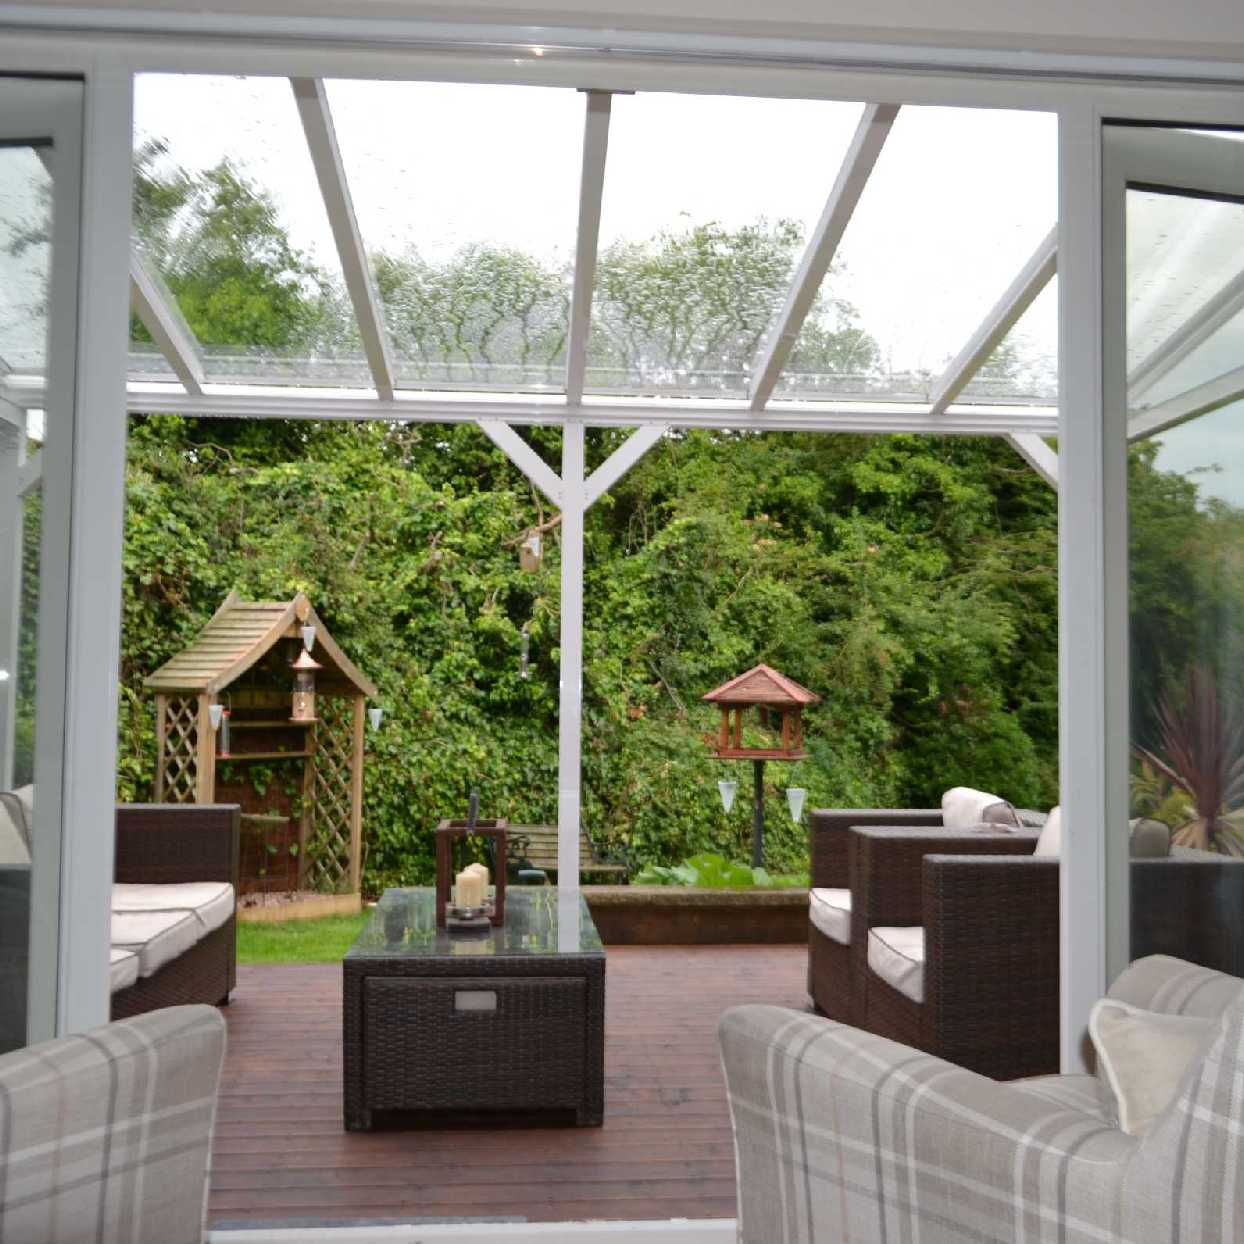 Buy Omega Smart Free-Standing, White MonoPitch Roof Canopy with 6mm Glass Clear Plate Polycarbonate Glazing - 6.3m (W) x 4.0m (P), (8) Supporting Posts online today